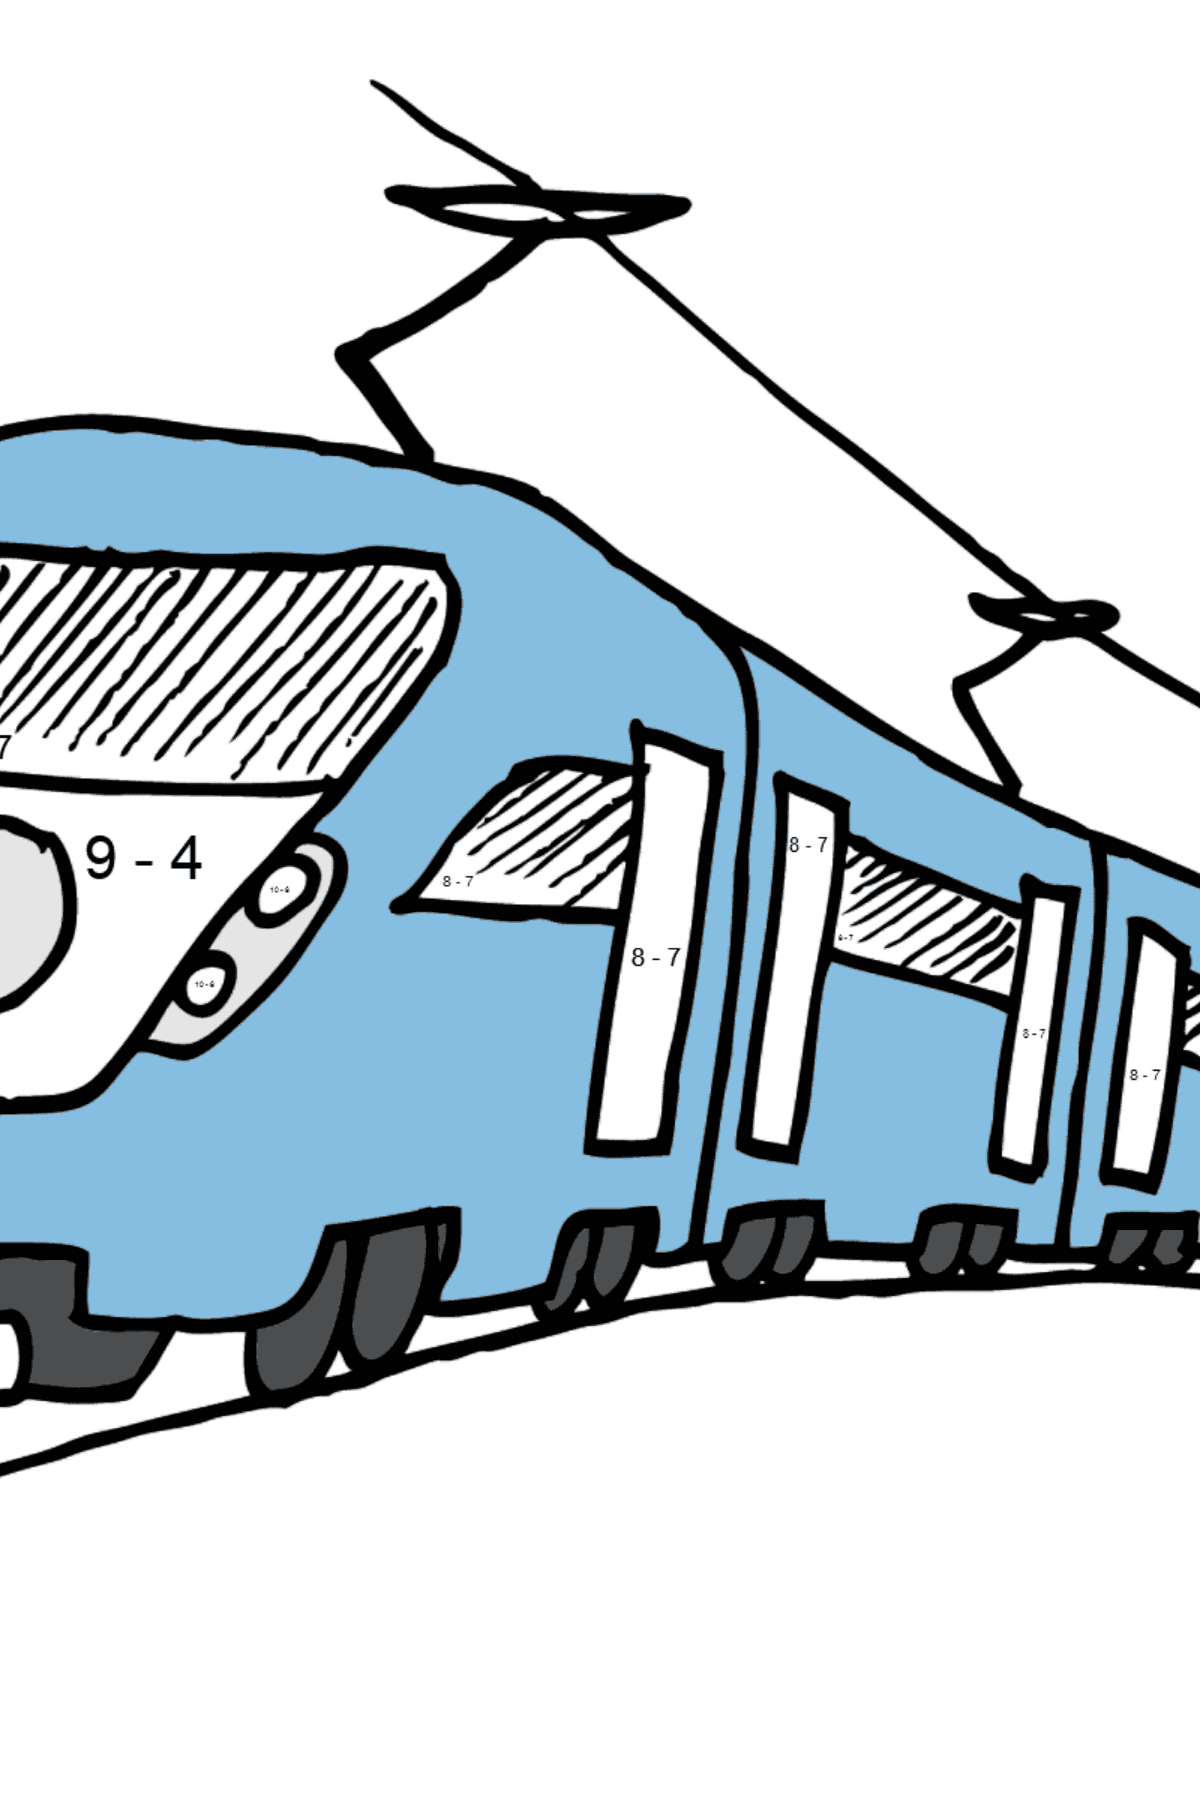 Coloring Page - A Passenger Train - Math Coloring - Subtraction for Kids